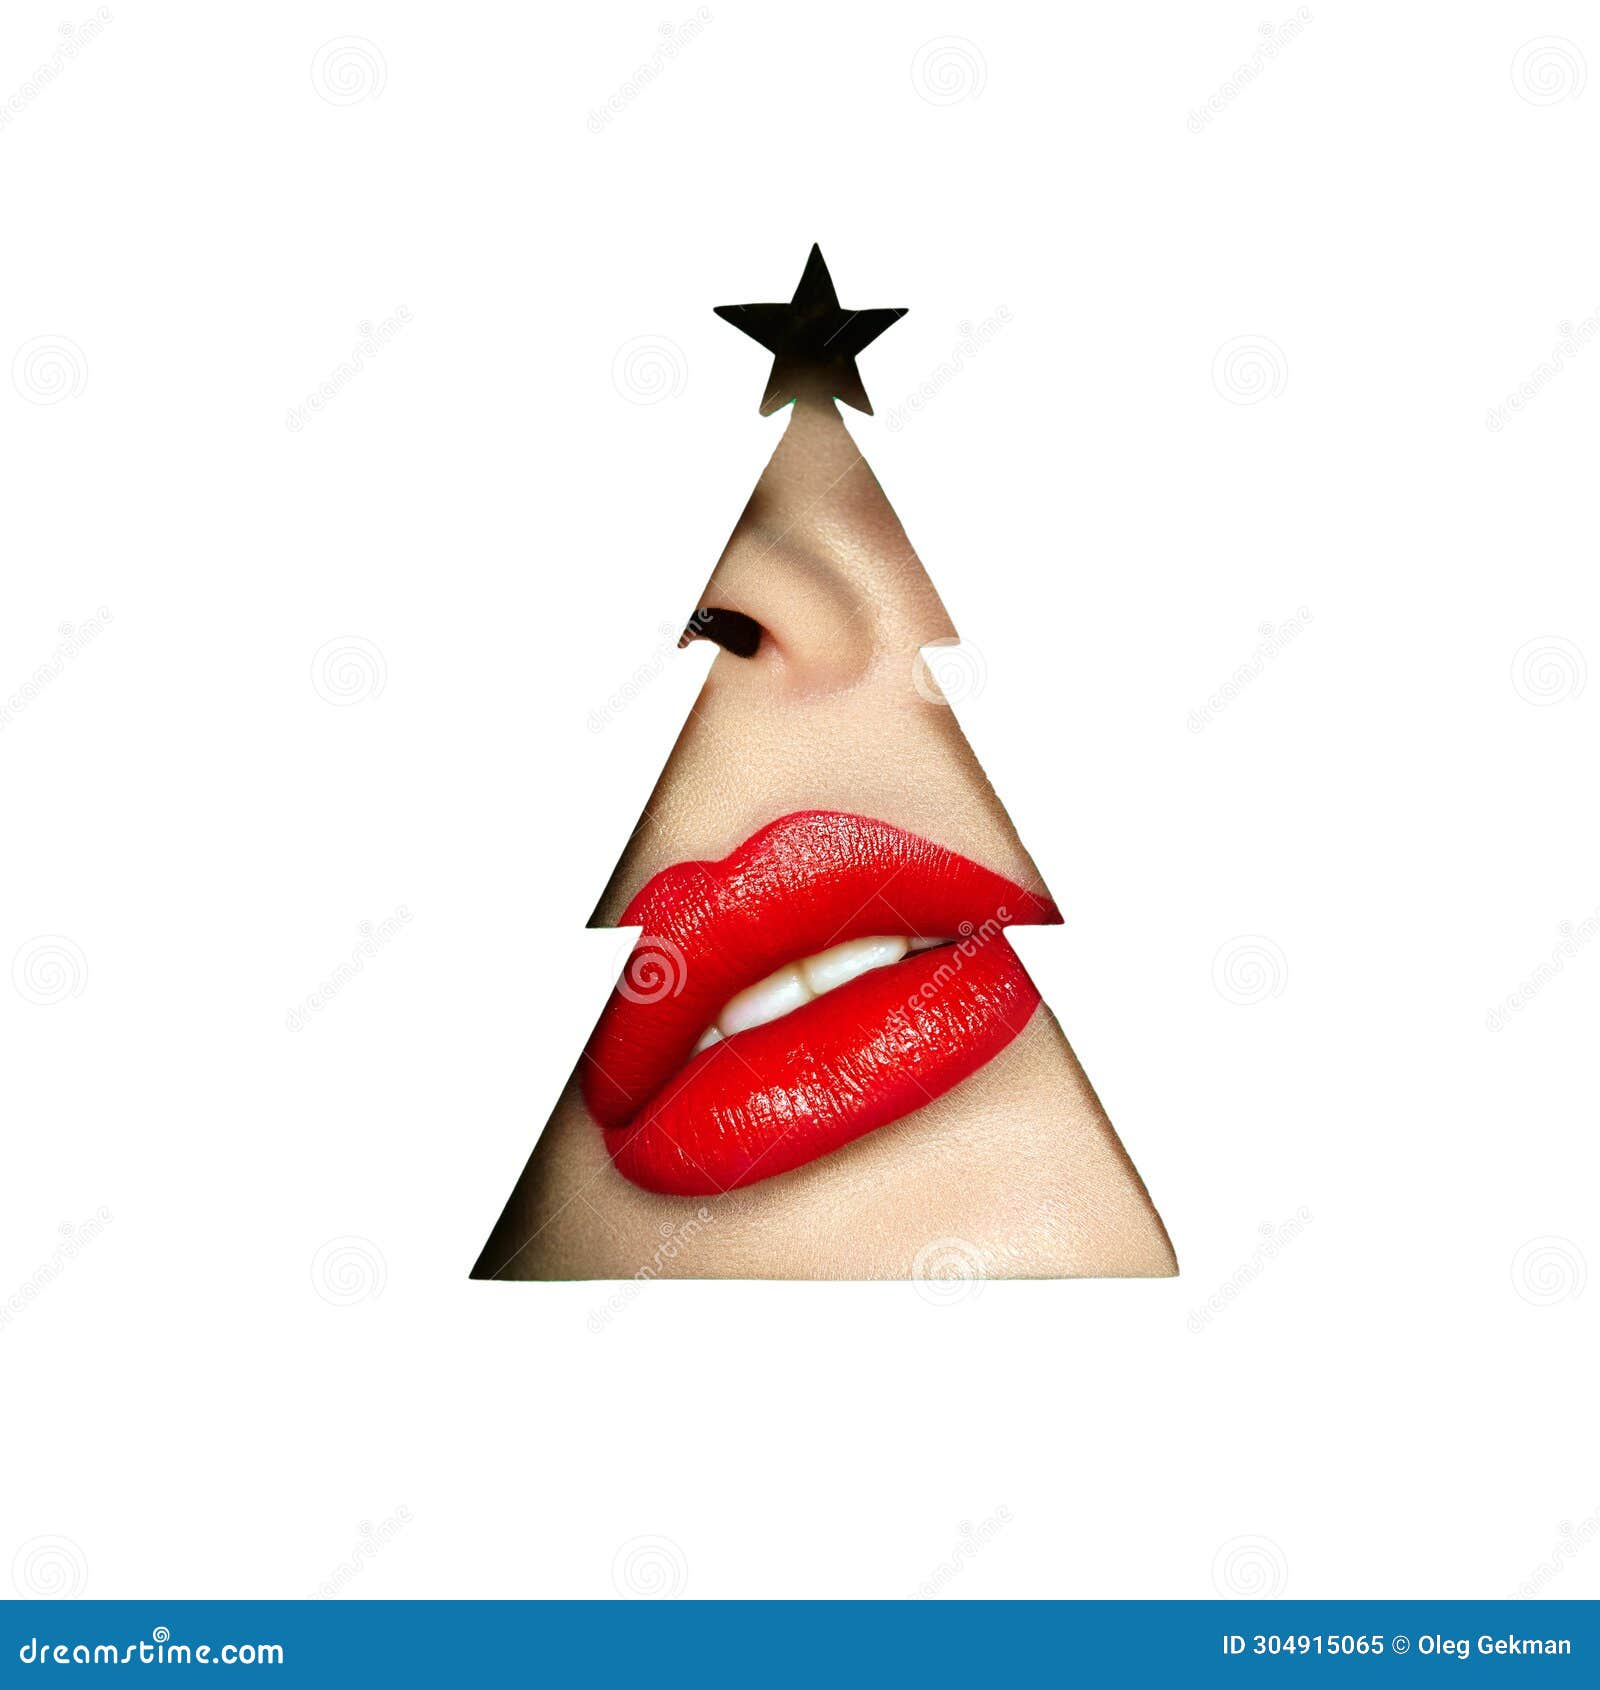 Lips of a Young Beautiful Woman with a Red Lipstick Stock Image - Image ...